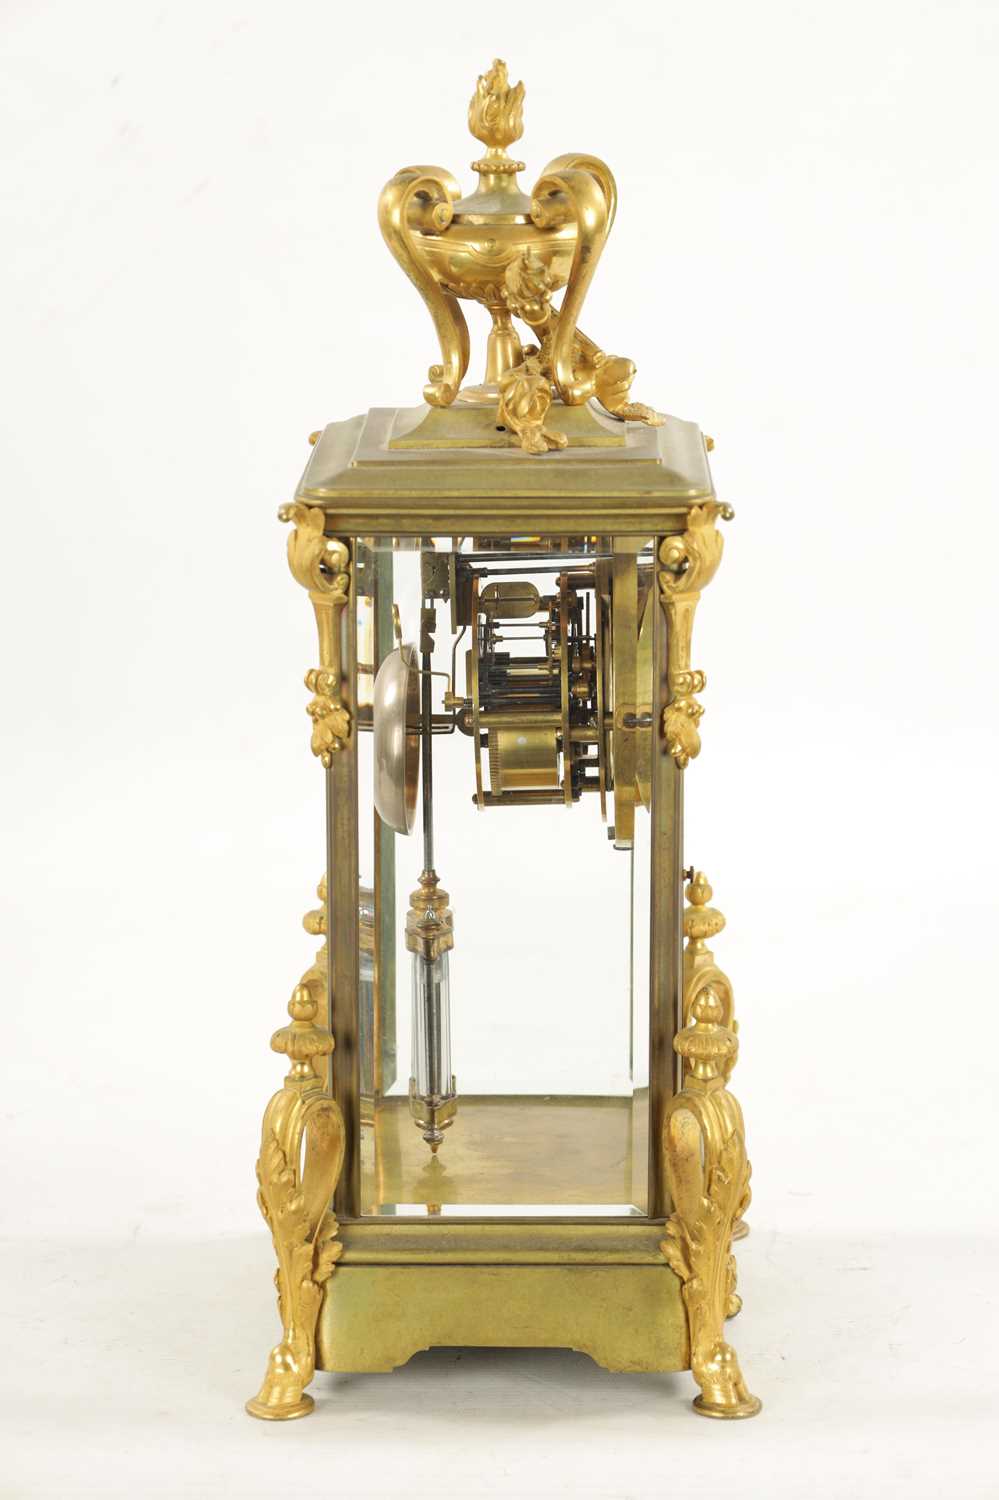 A LATE 19TH CENTURY FRENCH GILT BRASS FOUR-GLASS MANTEL CLOCK - Image 10 of 10